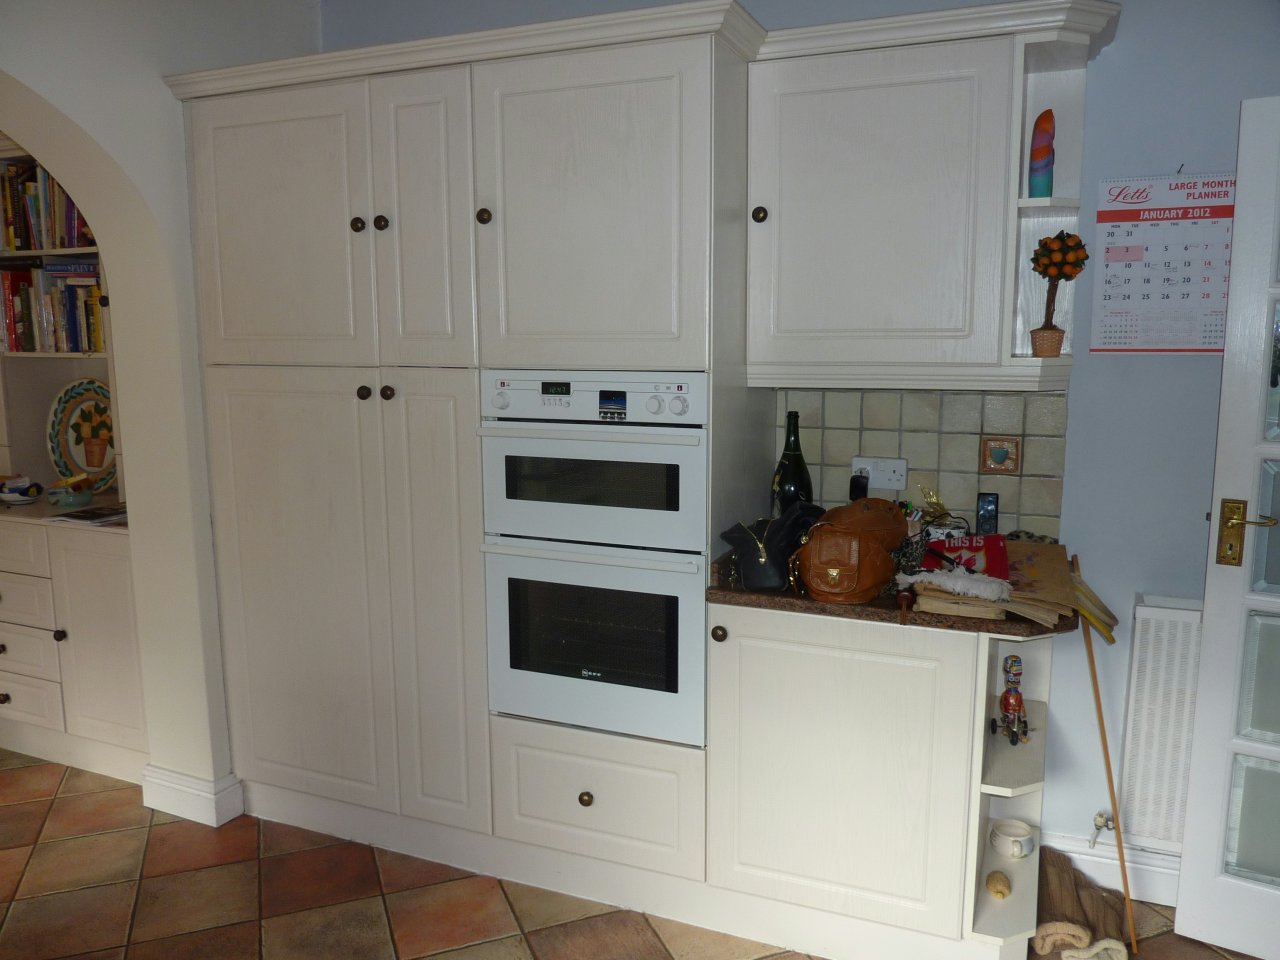 JPEG image - The kitchen as it was before the latest renovation ...